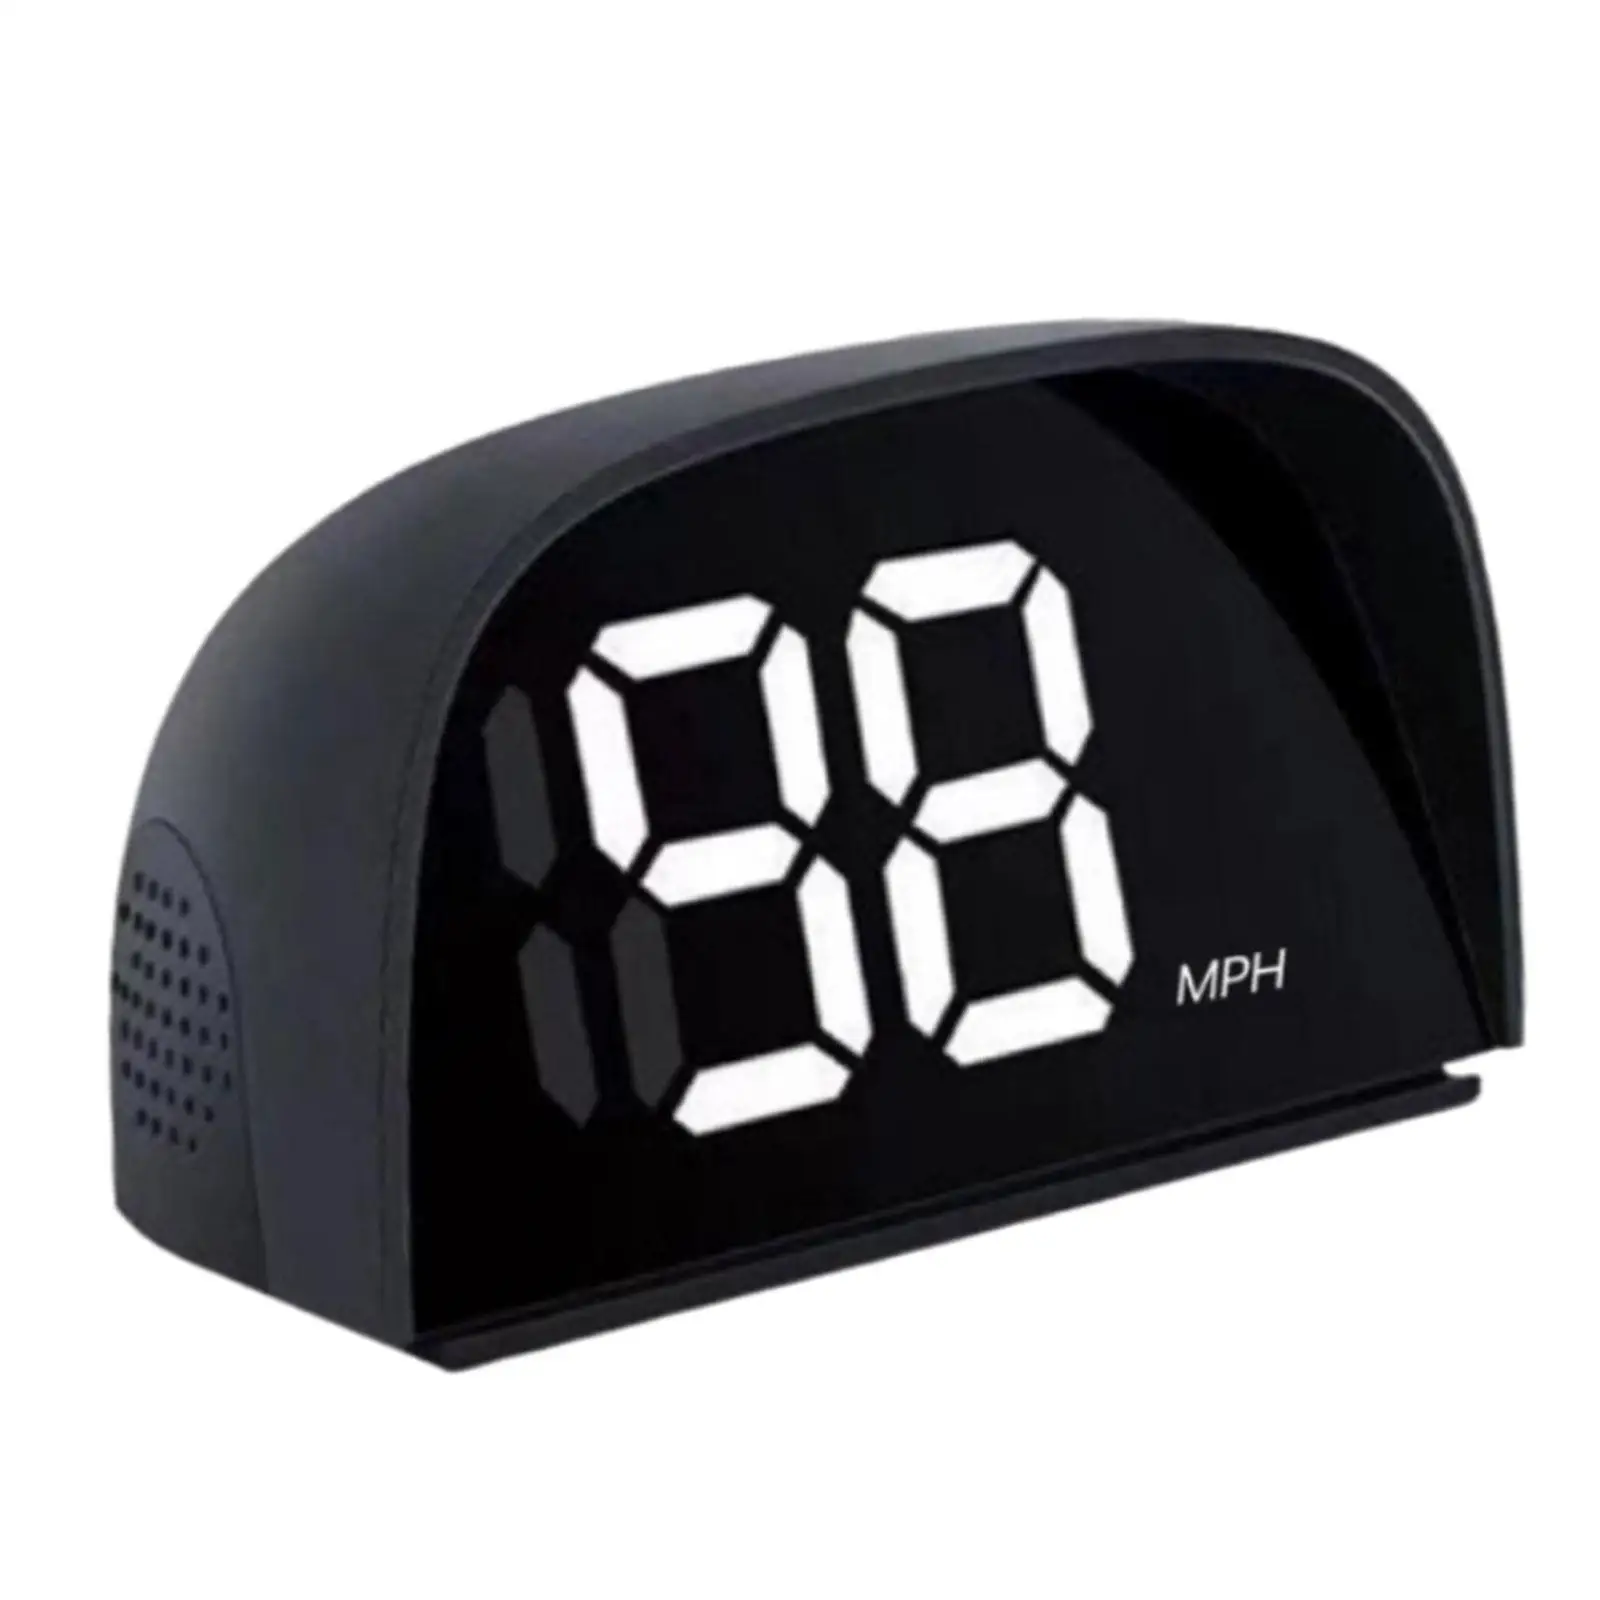 Car Heads up Display Clear at A Glance Universal Plug and Play Accessories for Trucks Vehicle High Performance